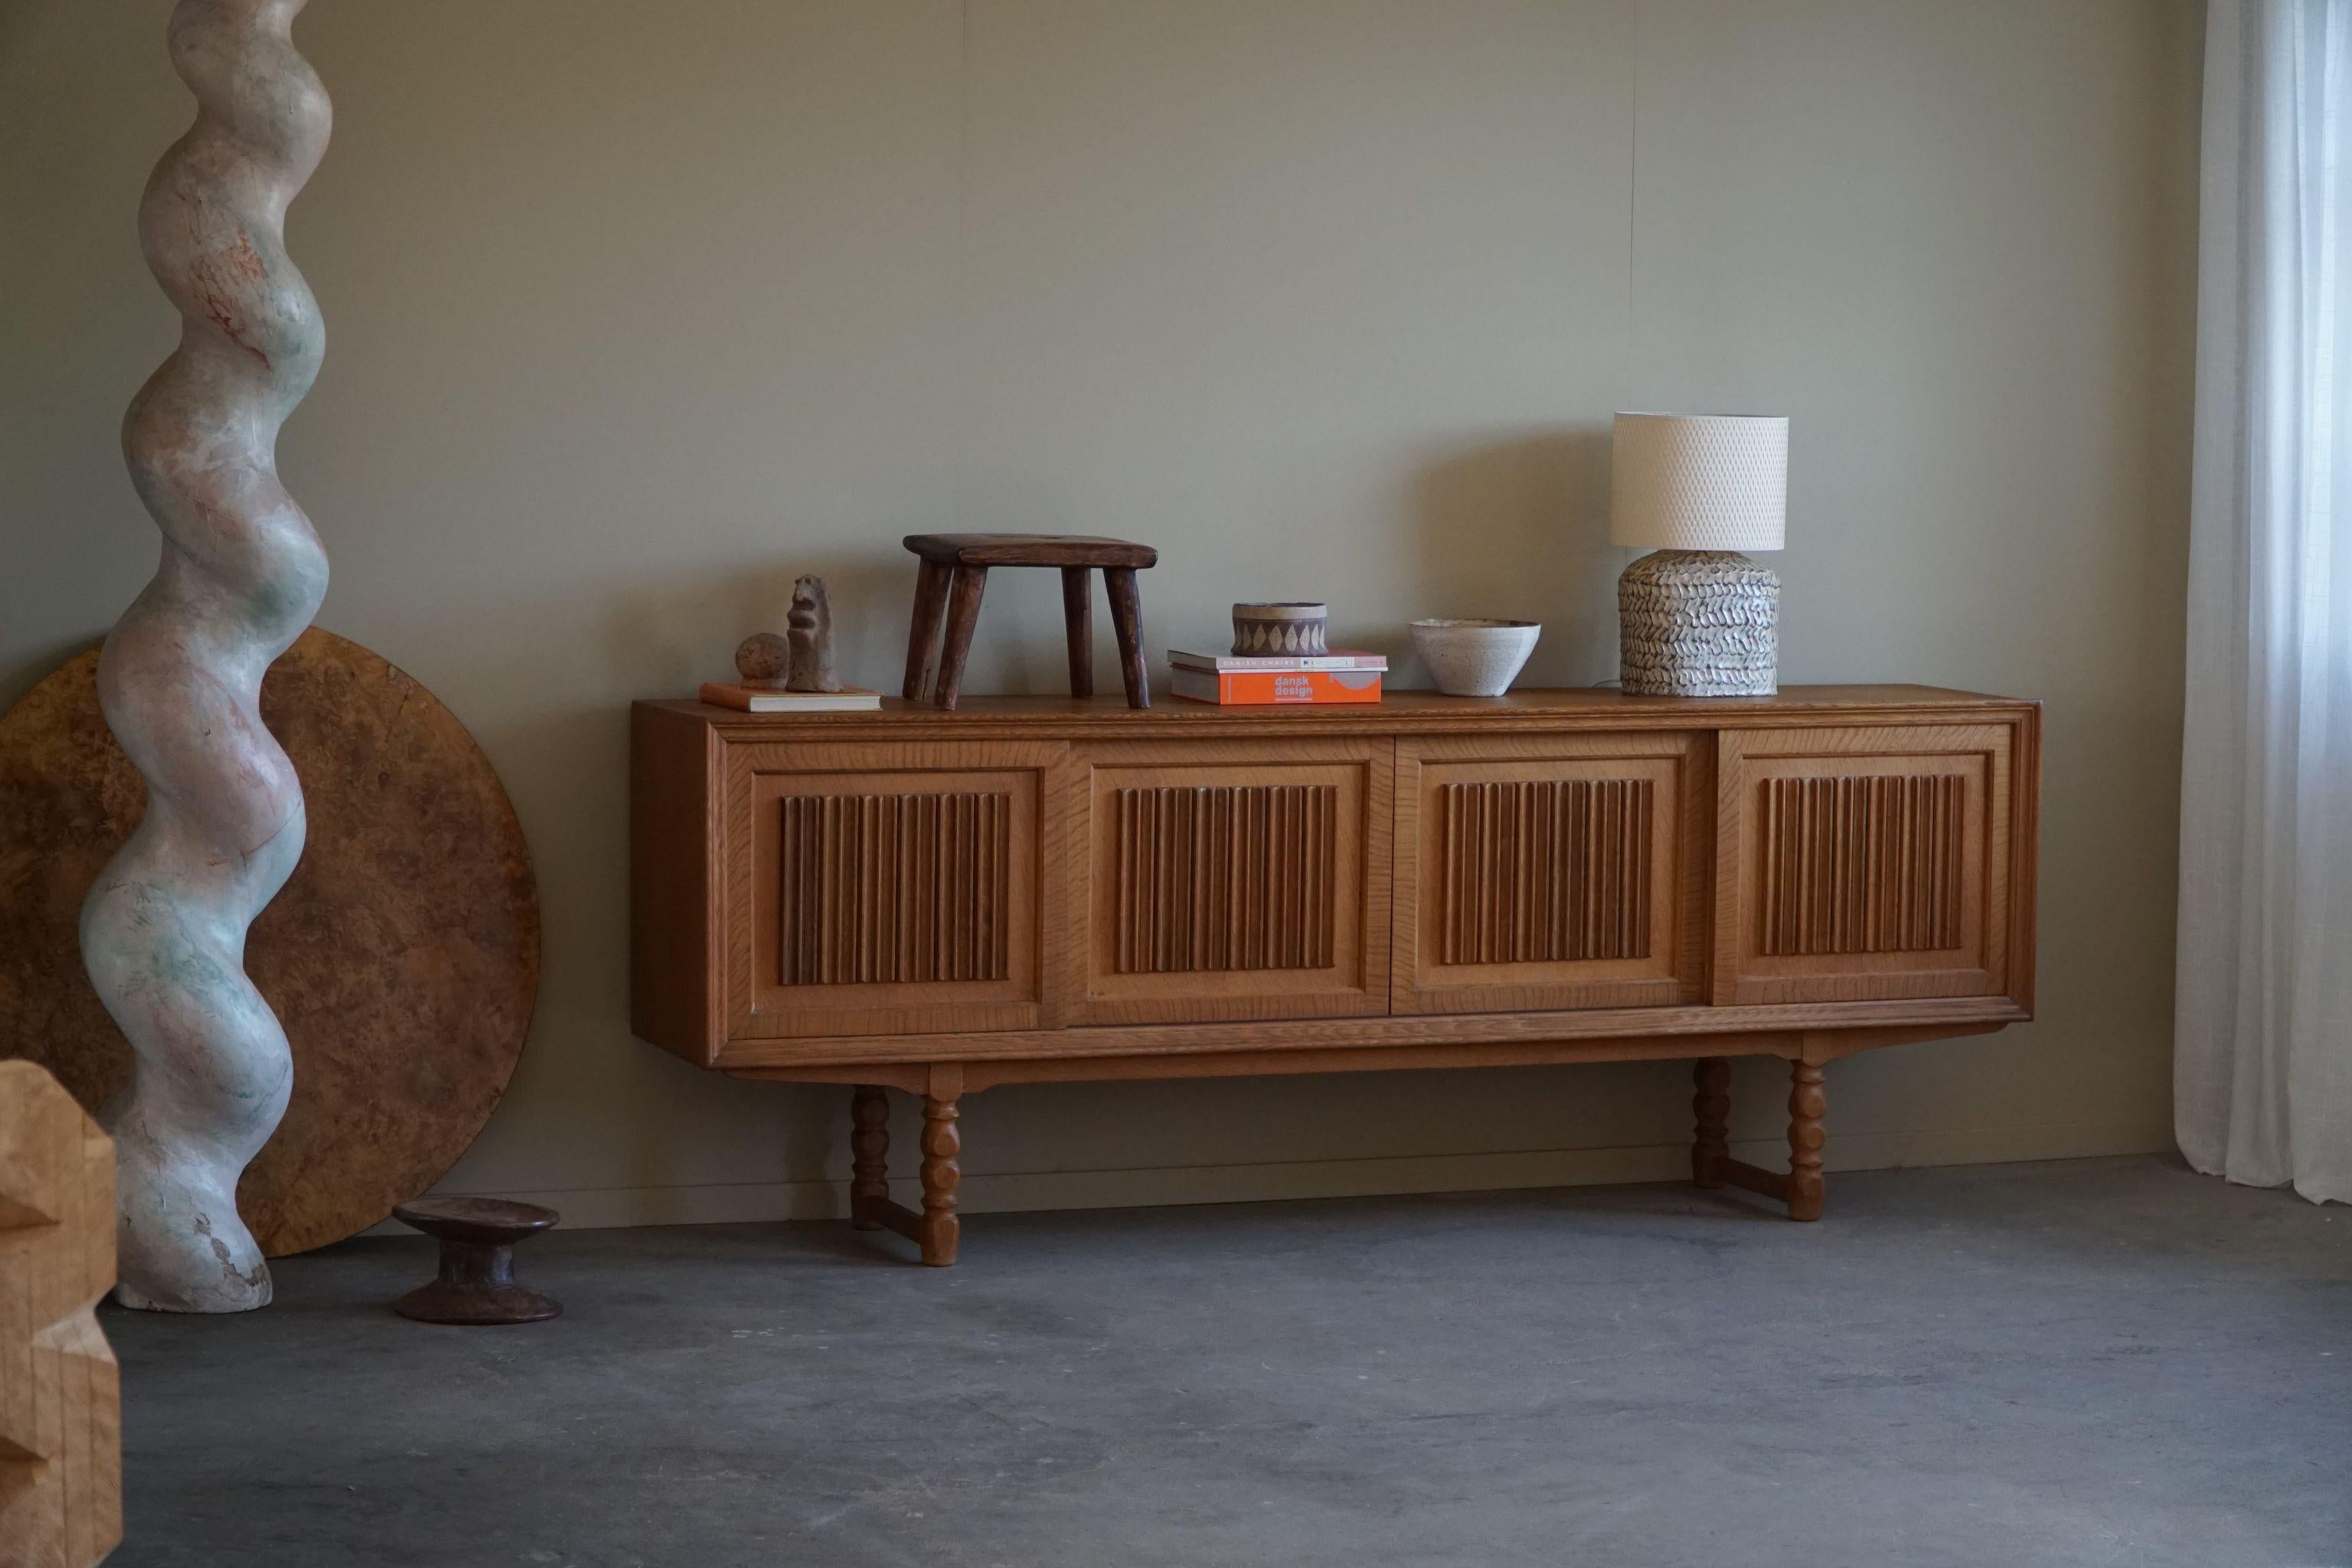 A sculptural low rectangular classic sideboard / cabinet in oak with plenty of storage and a nice carved front design. Made by a Danish cabinetmaker in the 1960s. 
Four sliding doors, inside storage and drawers.
This piece is in a good vintage